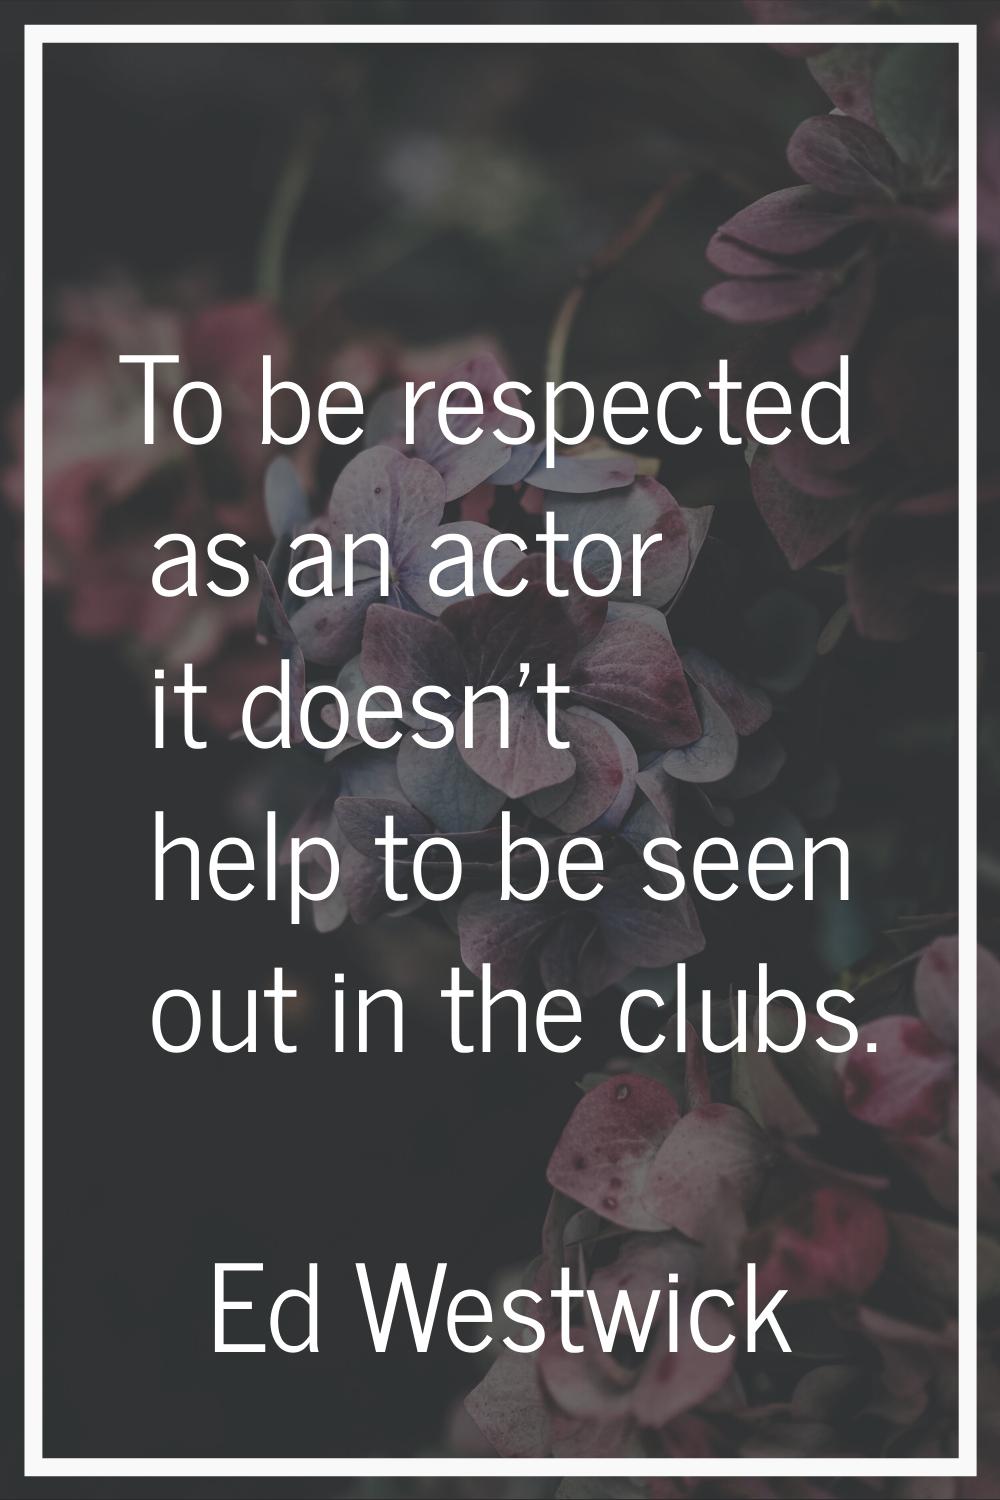 To be respected as an actor it doesn't help to be seen out in the clubs.